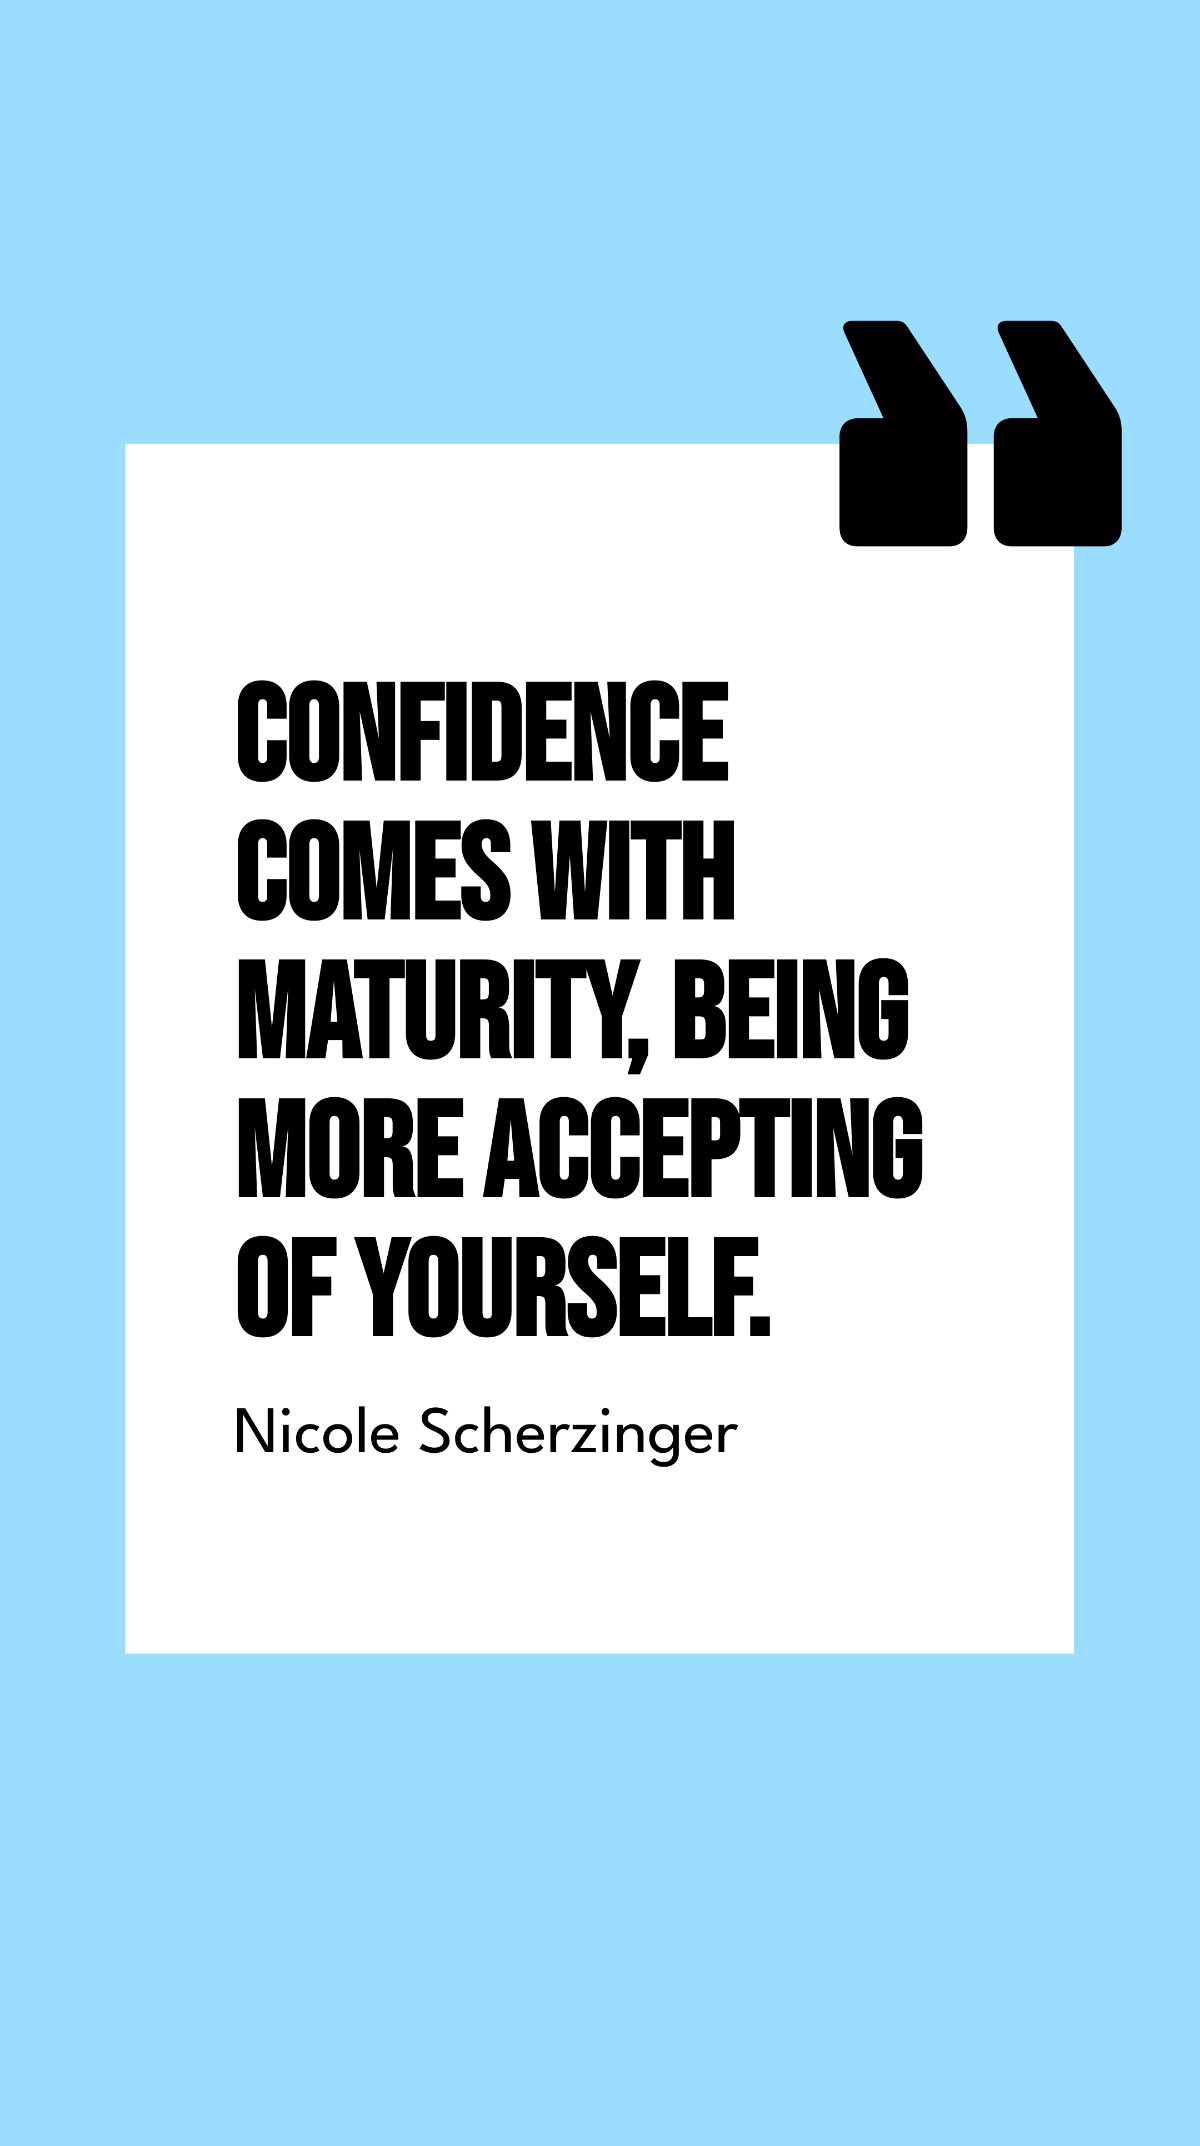 Nicole Scherzinger - Confidence comes with maturity, being more accepting of yourself. Template